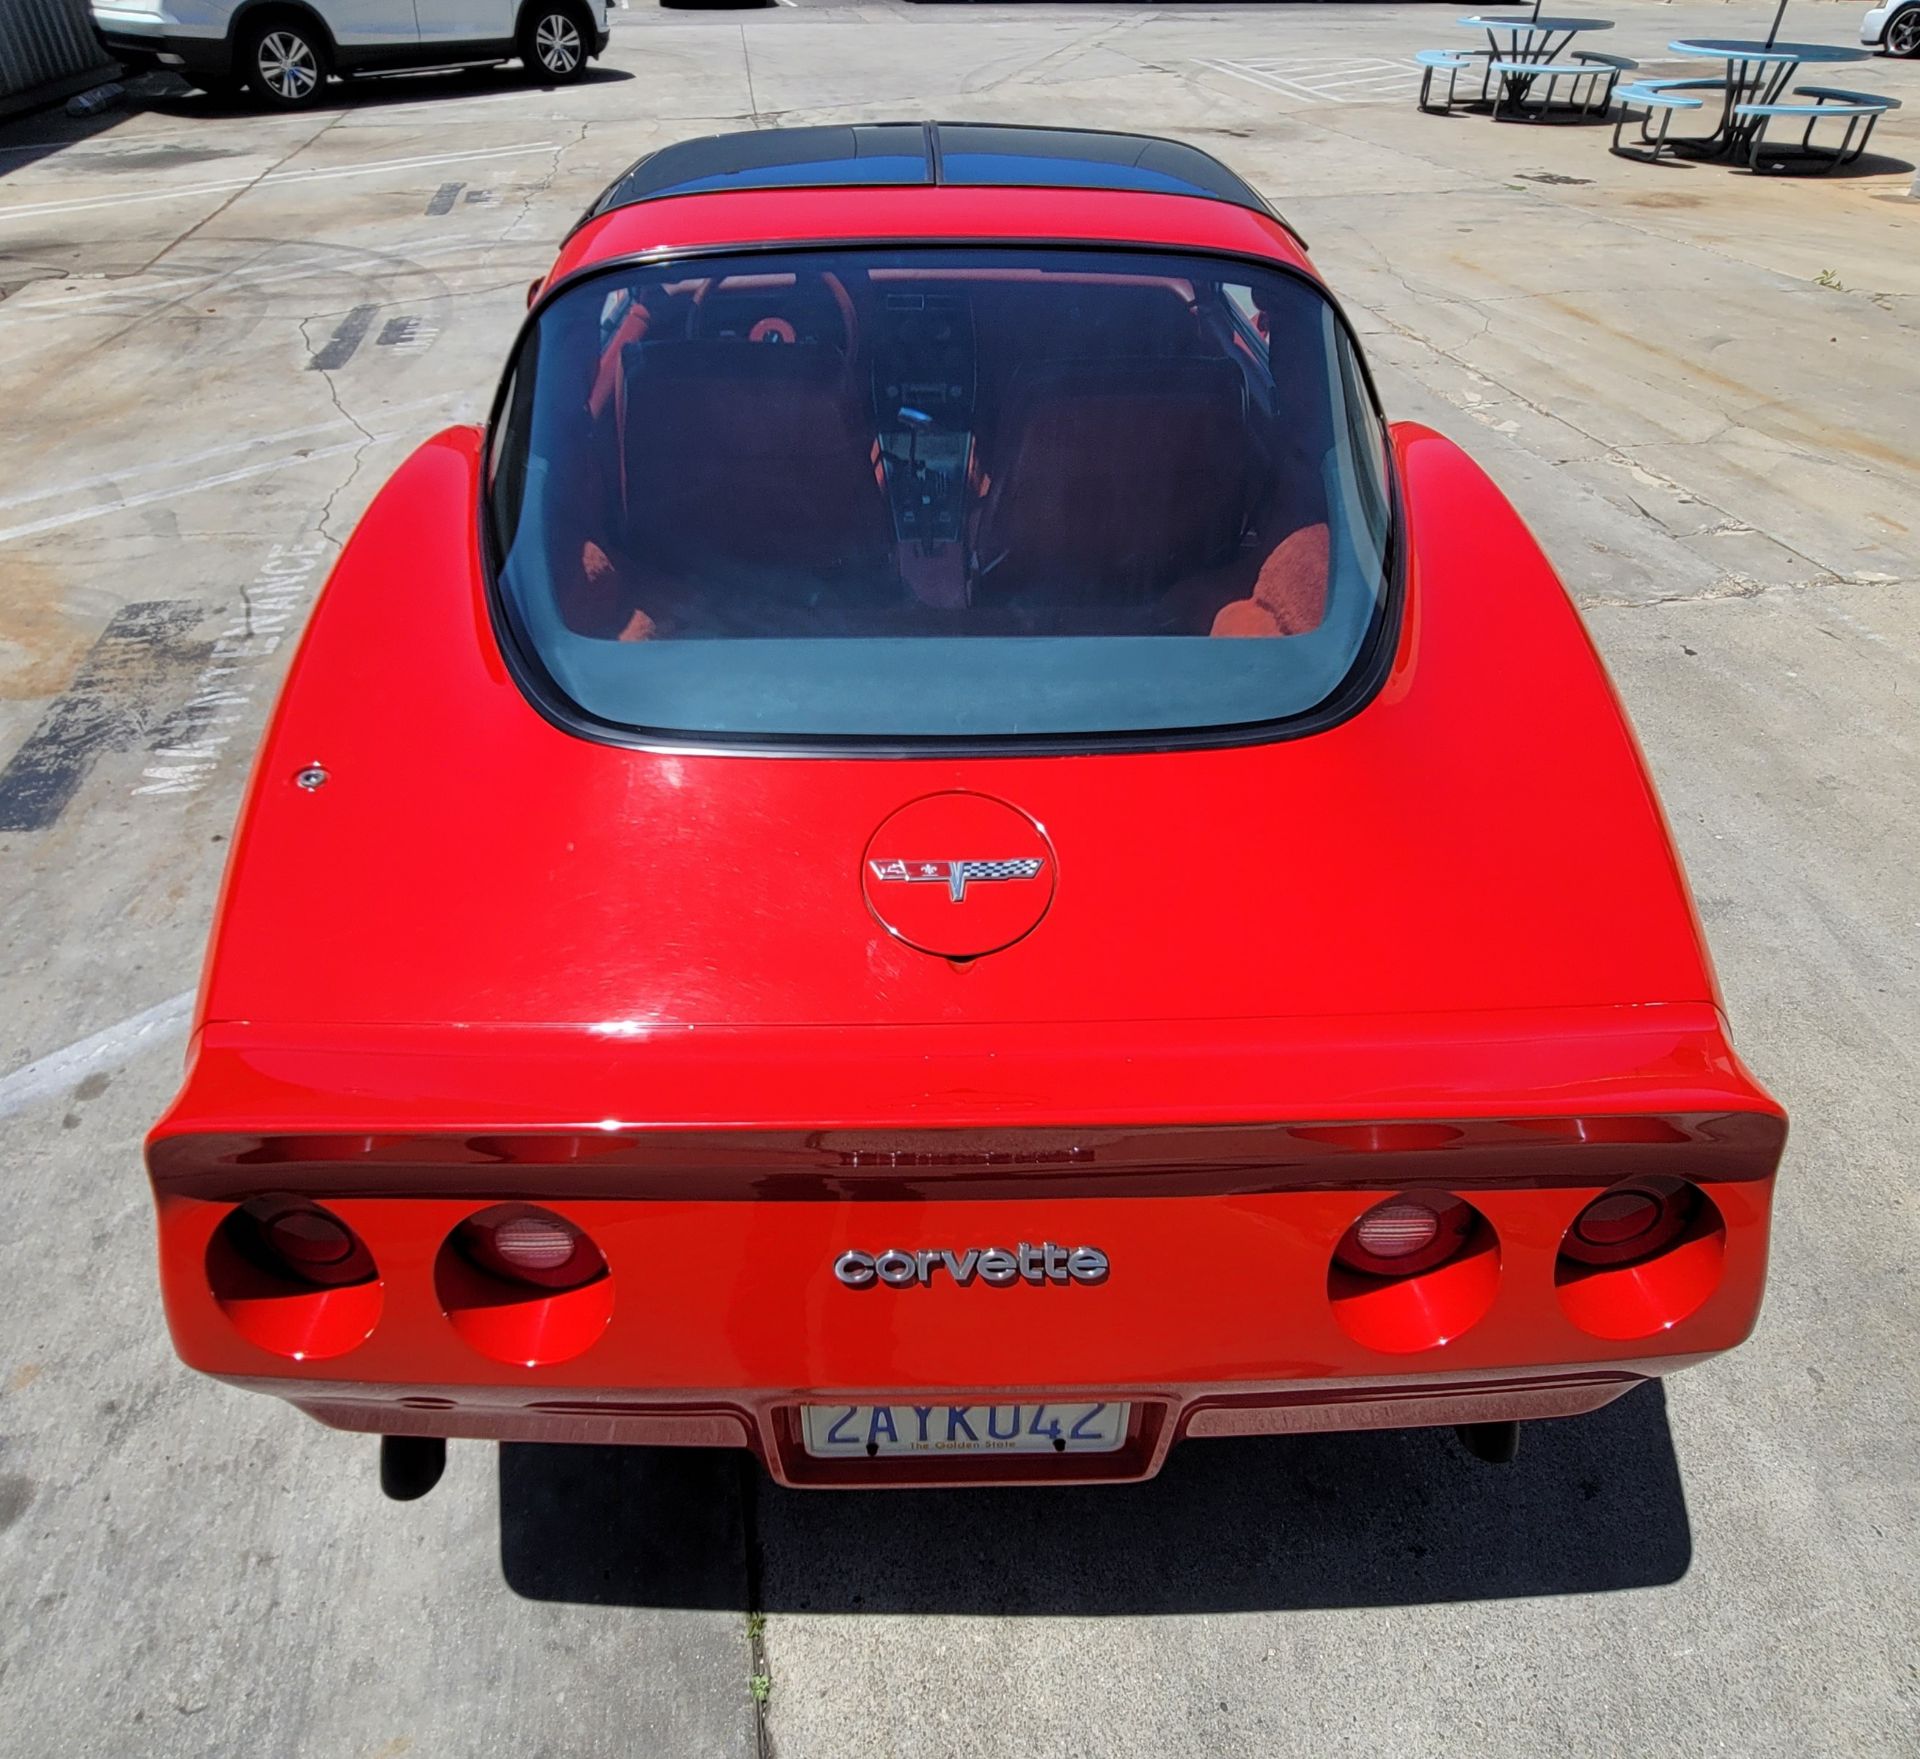 1980 CHEVROLET CORVETTE, WAS VIC EDELBROCK'S PERSONAL CAR BOUGHT FOR R&D, RED INTERIOR, TITLE ONLY. - Image 43 of 70